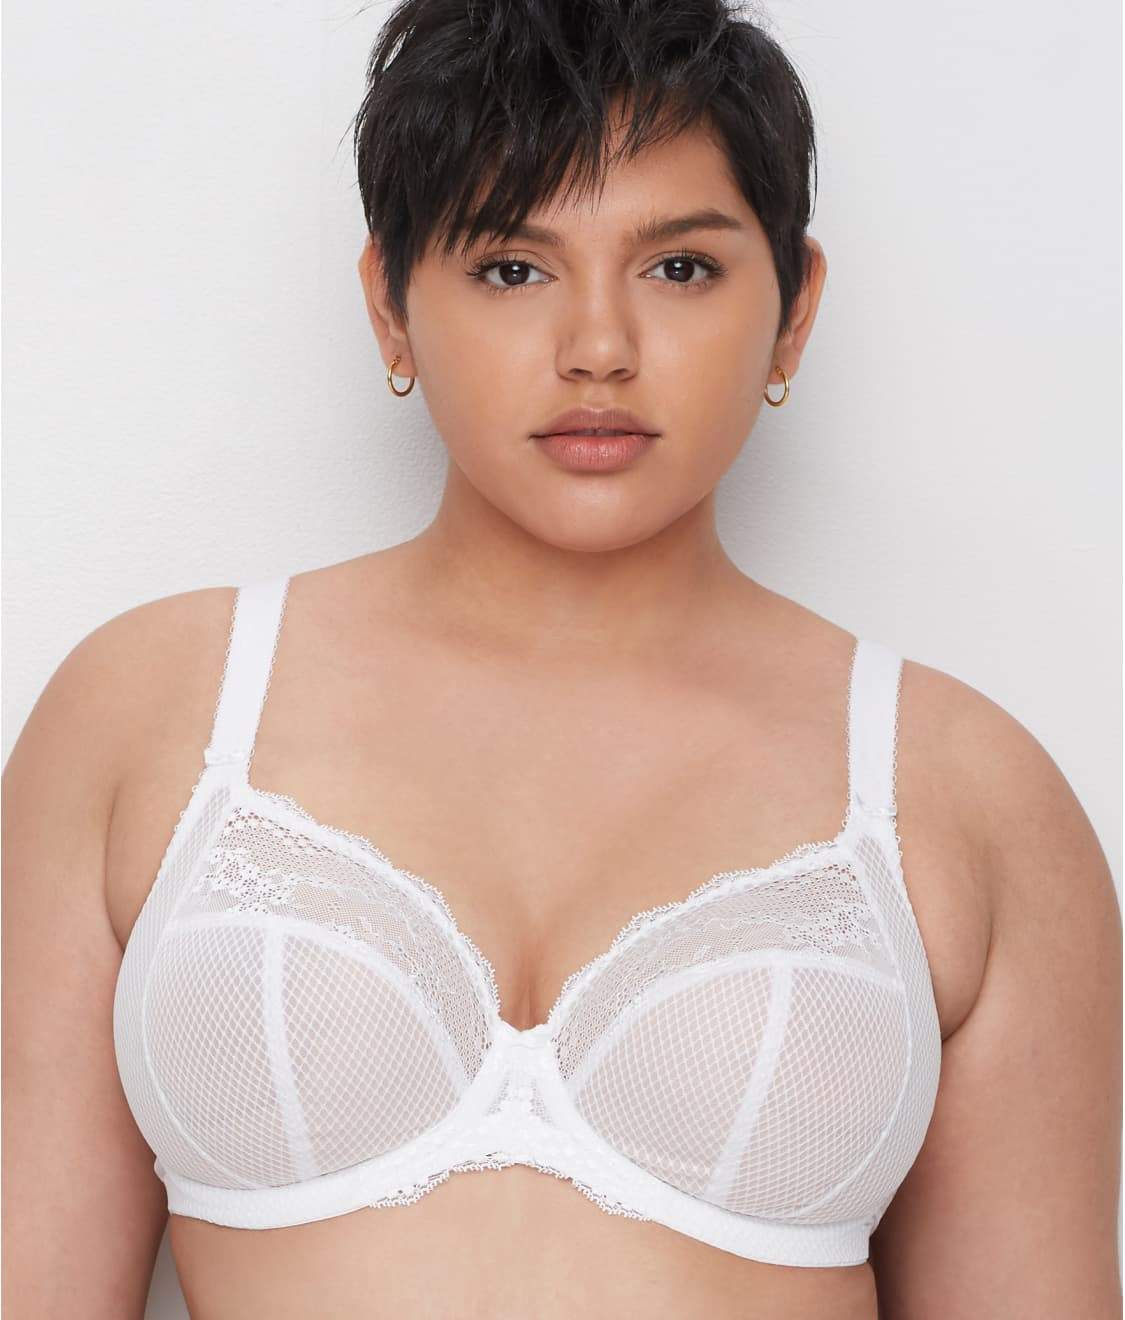 CHARLEY BRA - WHITE - Expect Lace